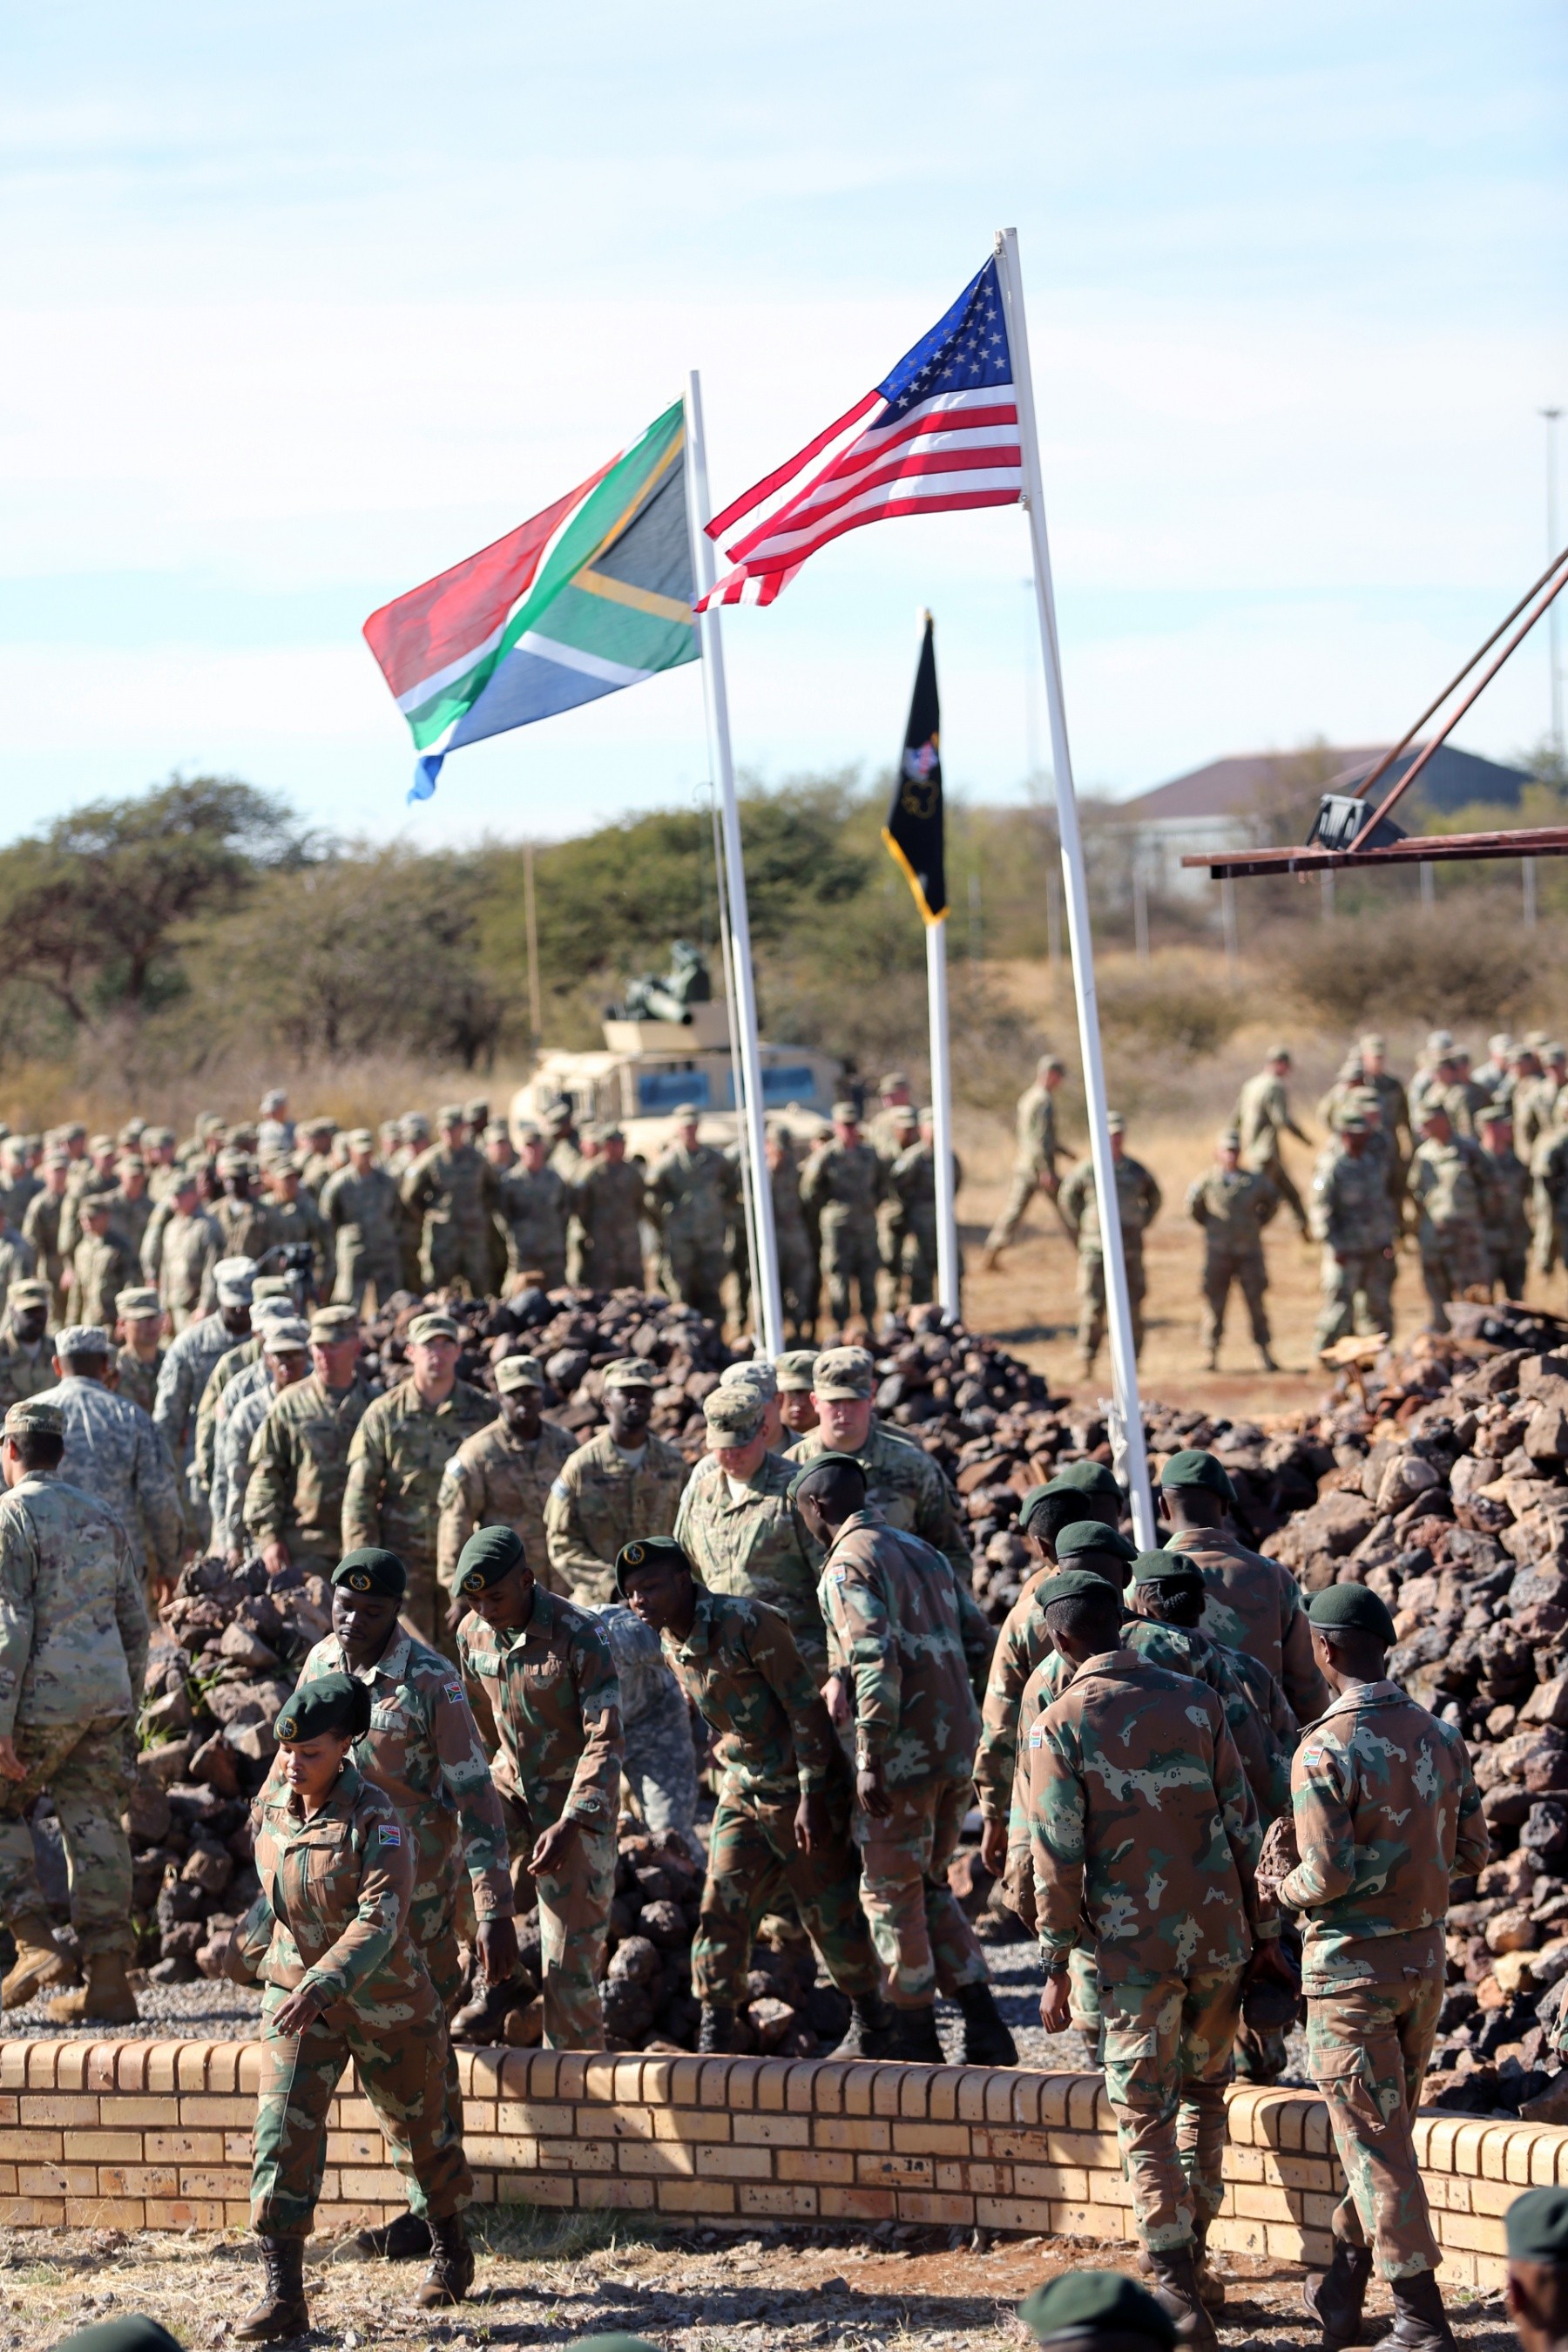 U S South African Troops Kick Off Shared Accord 2017 With Ceremonial